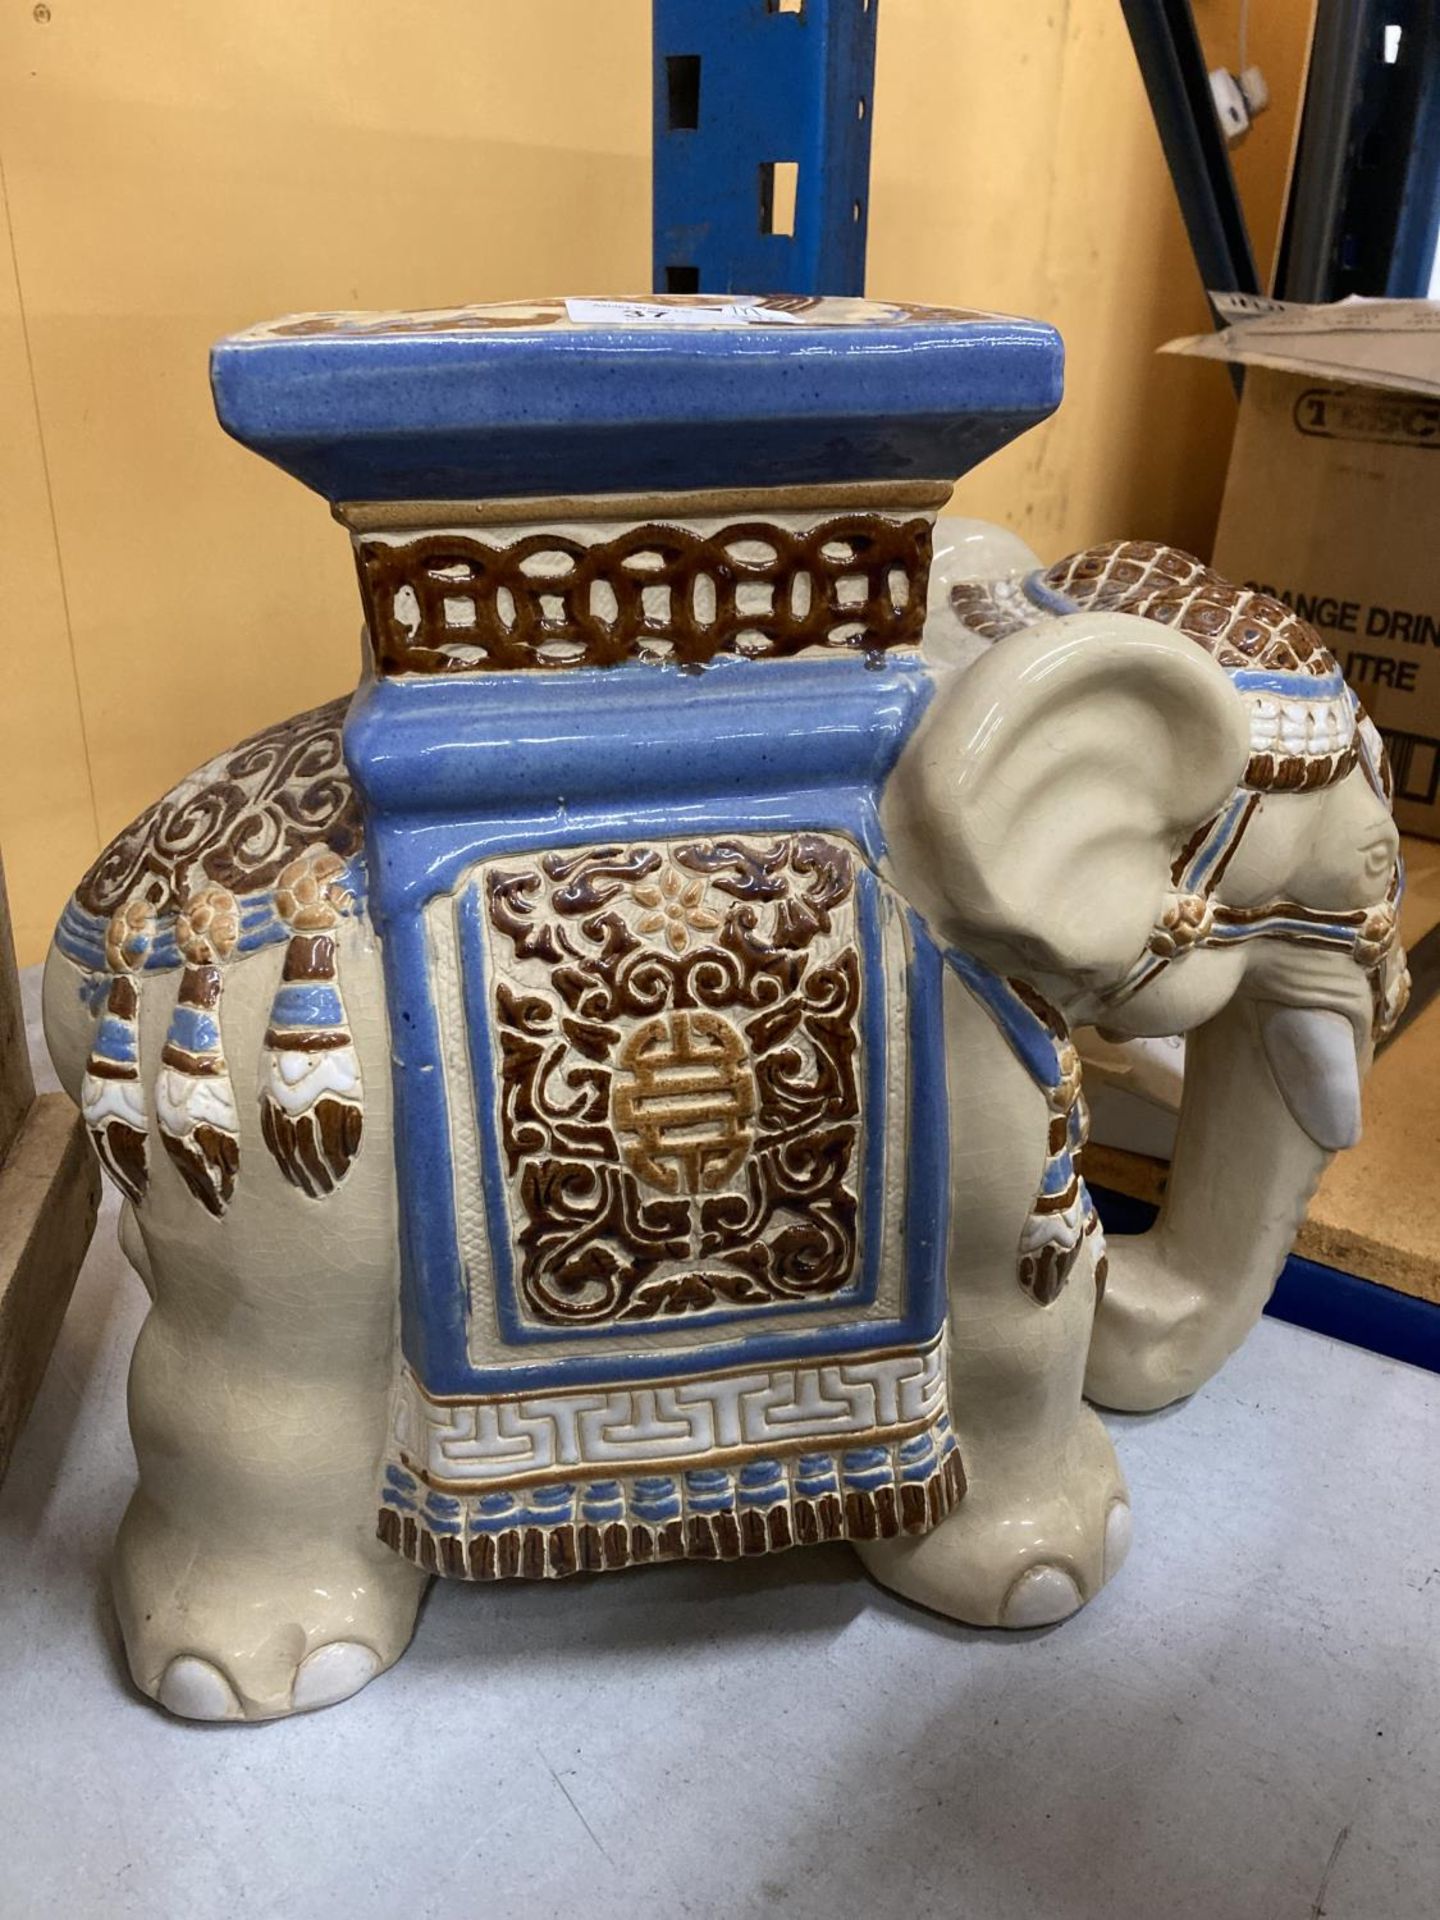 A LARGE CERAMIC ELEPHANT STAND/SEAT - Image 2 of 4